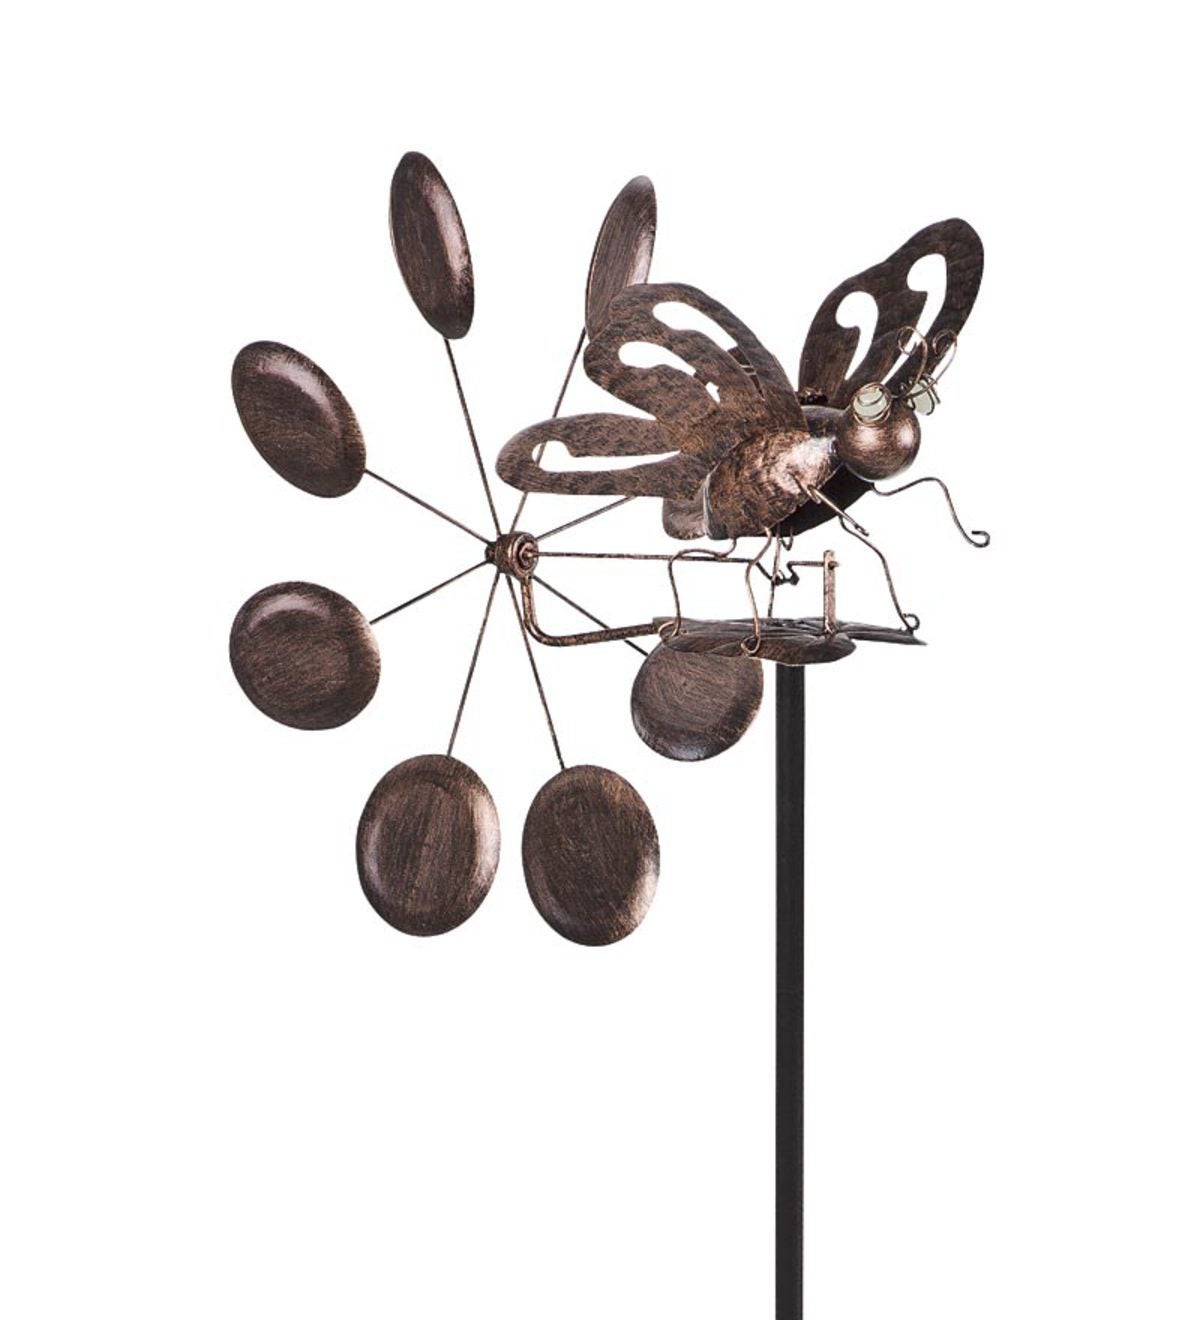 Solar Dragonfly or Butterfly Wind Spinner/Whirligig - Butterfly